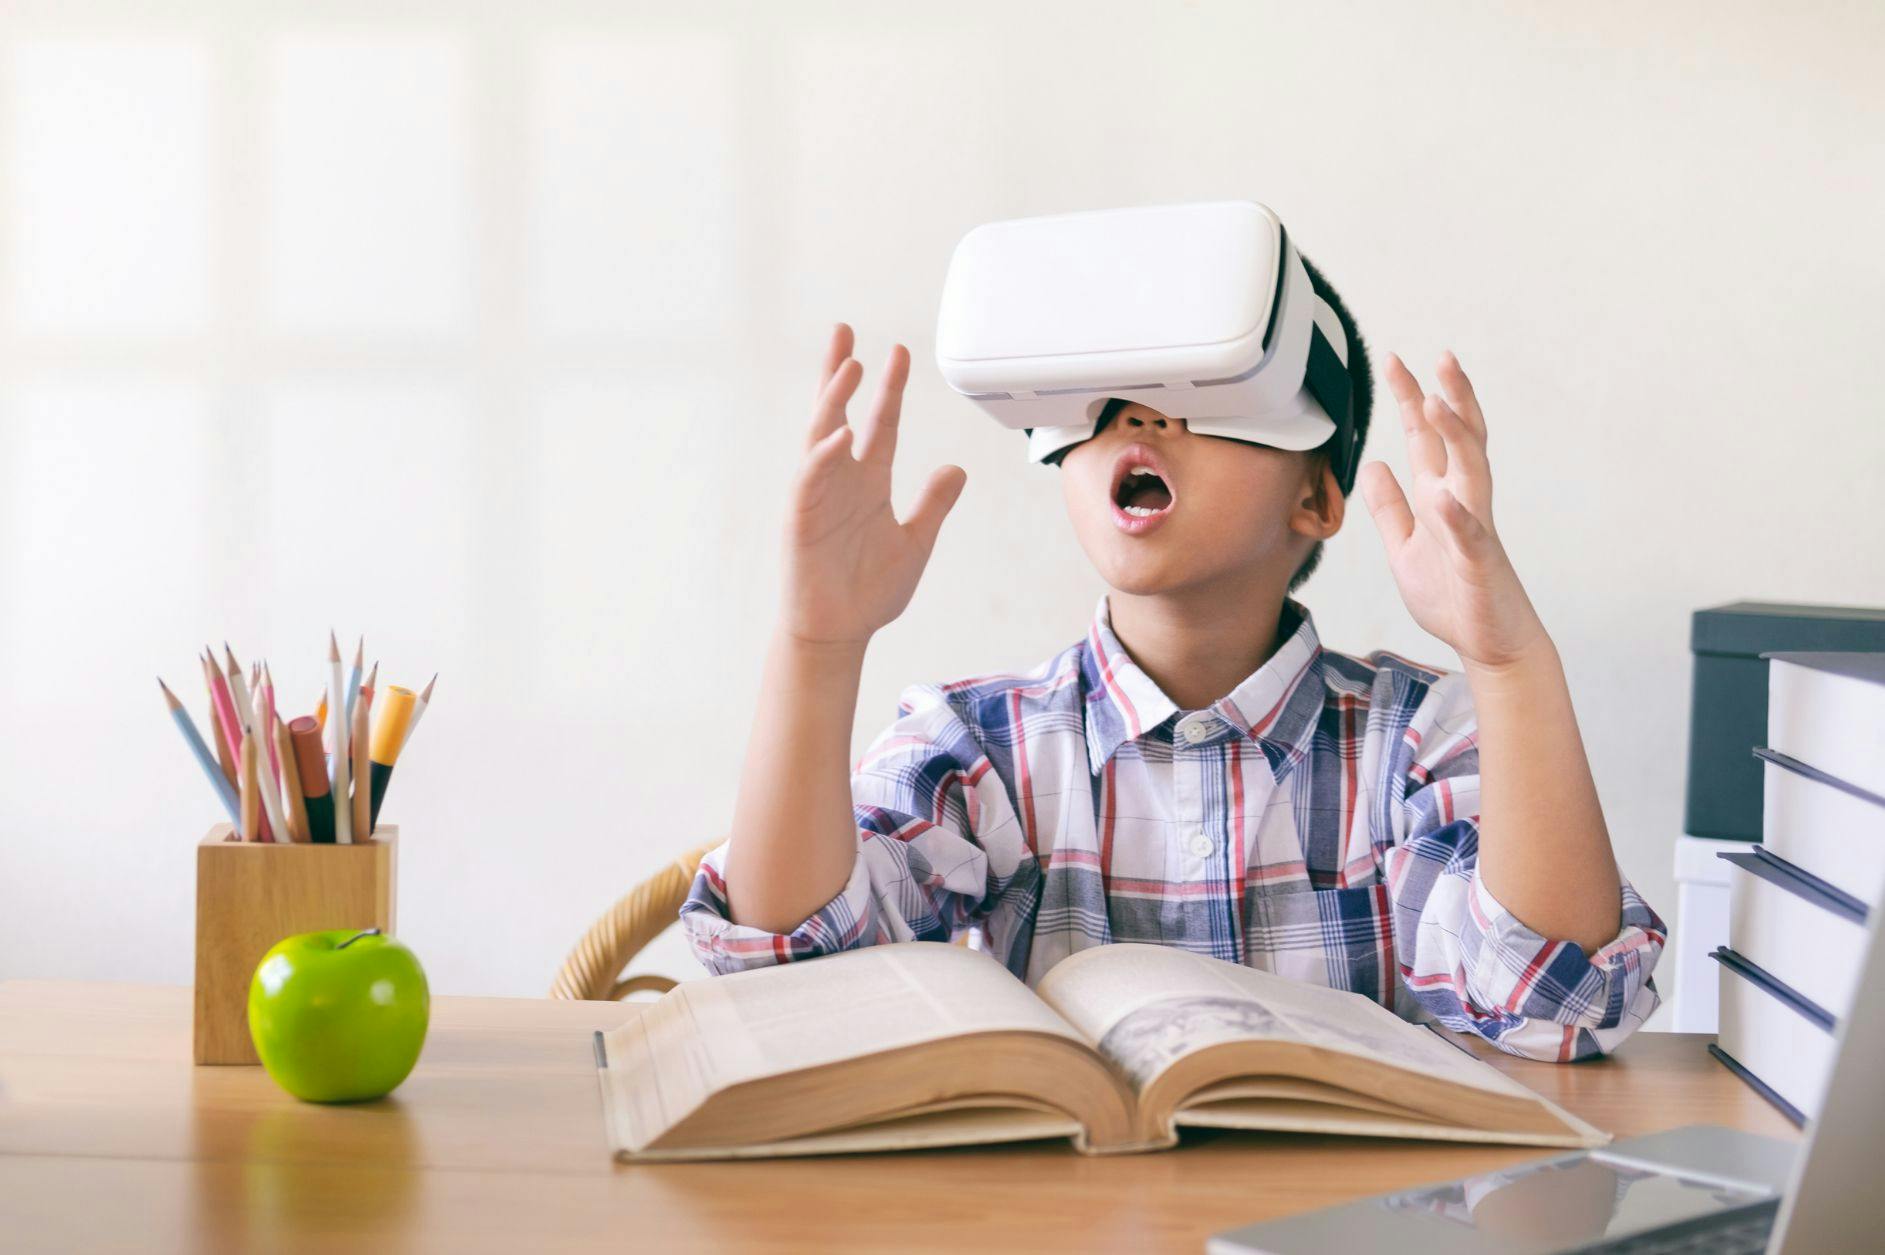 /how-is-augmented-reality-changing-the-way-students-learn-in-class feature image